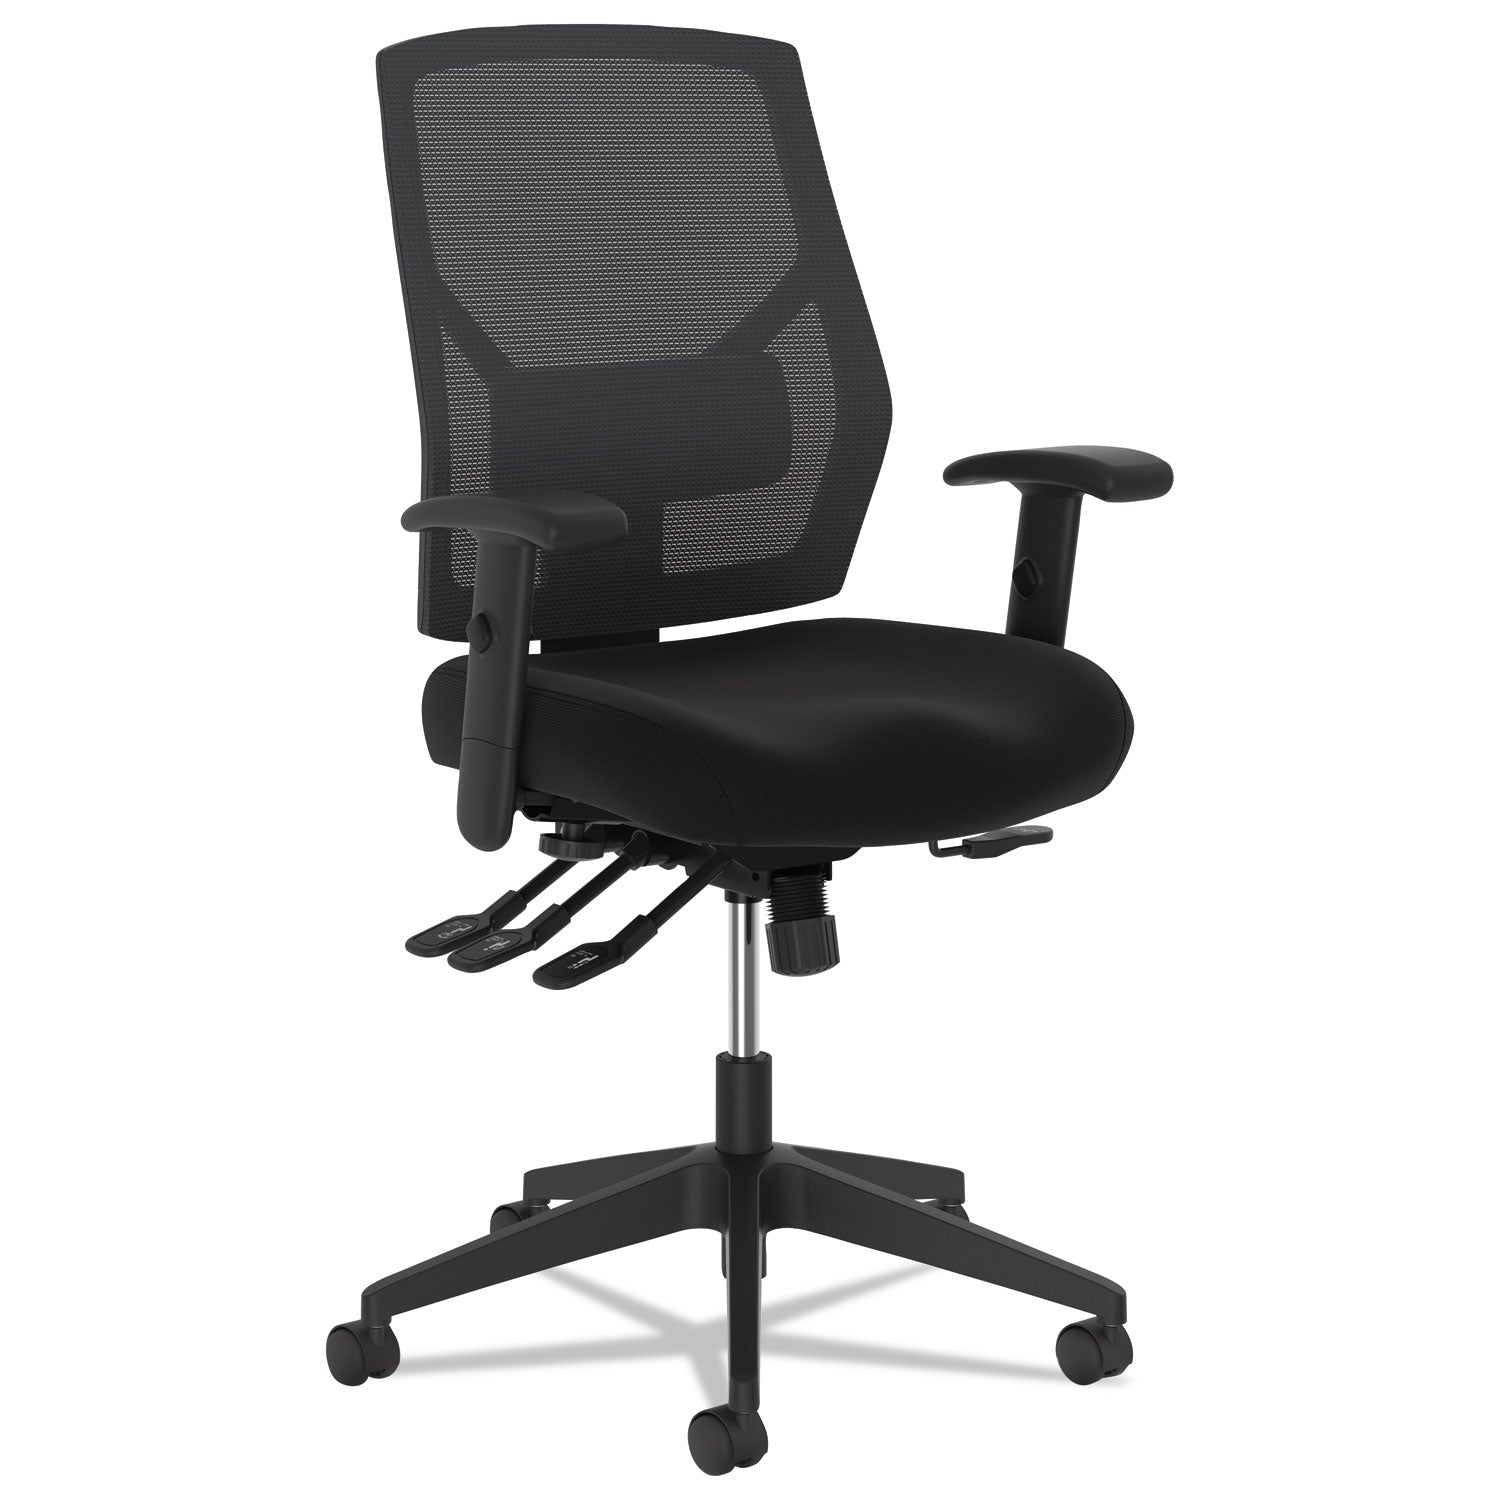 vl582-high-back-task-chair-supports-up-to-250-lb-19-to-22-seat-height-black_bsxvl582es10t - 1